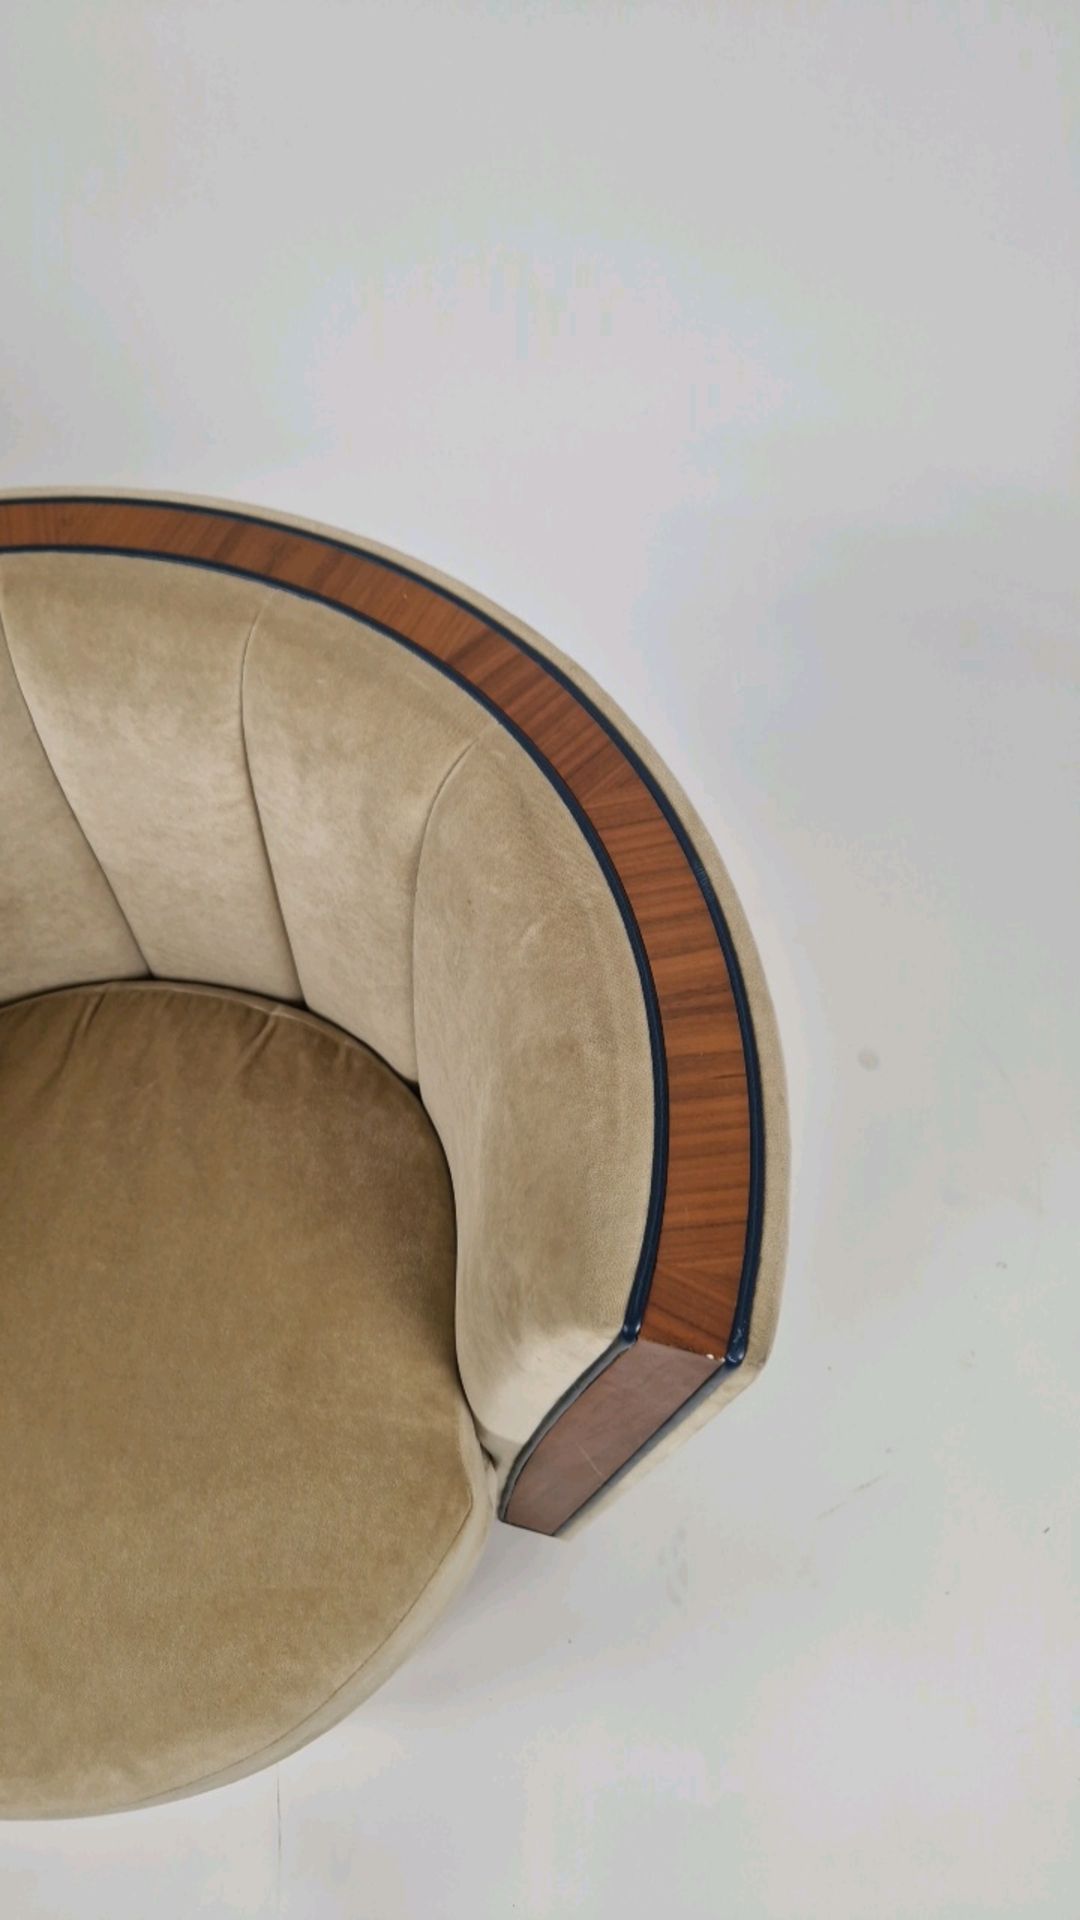 Bespoke Deco Tub Chair Made for Claridge's by David Linley - Image 3 of 7